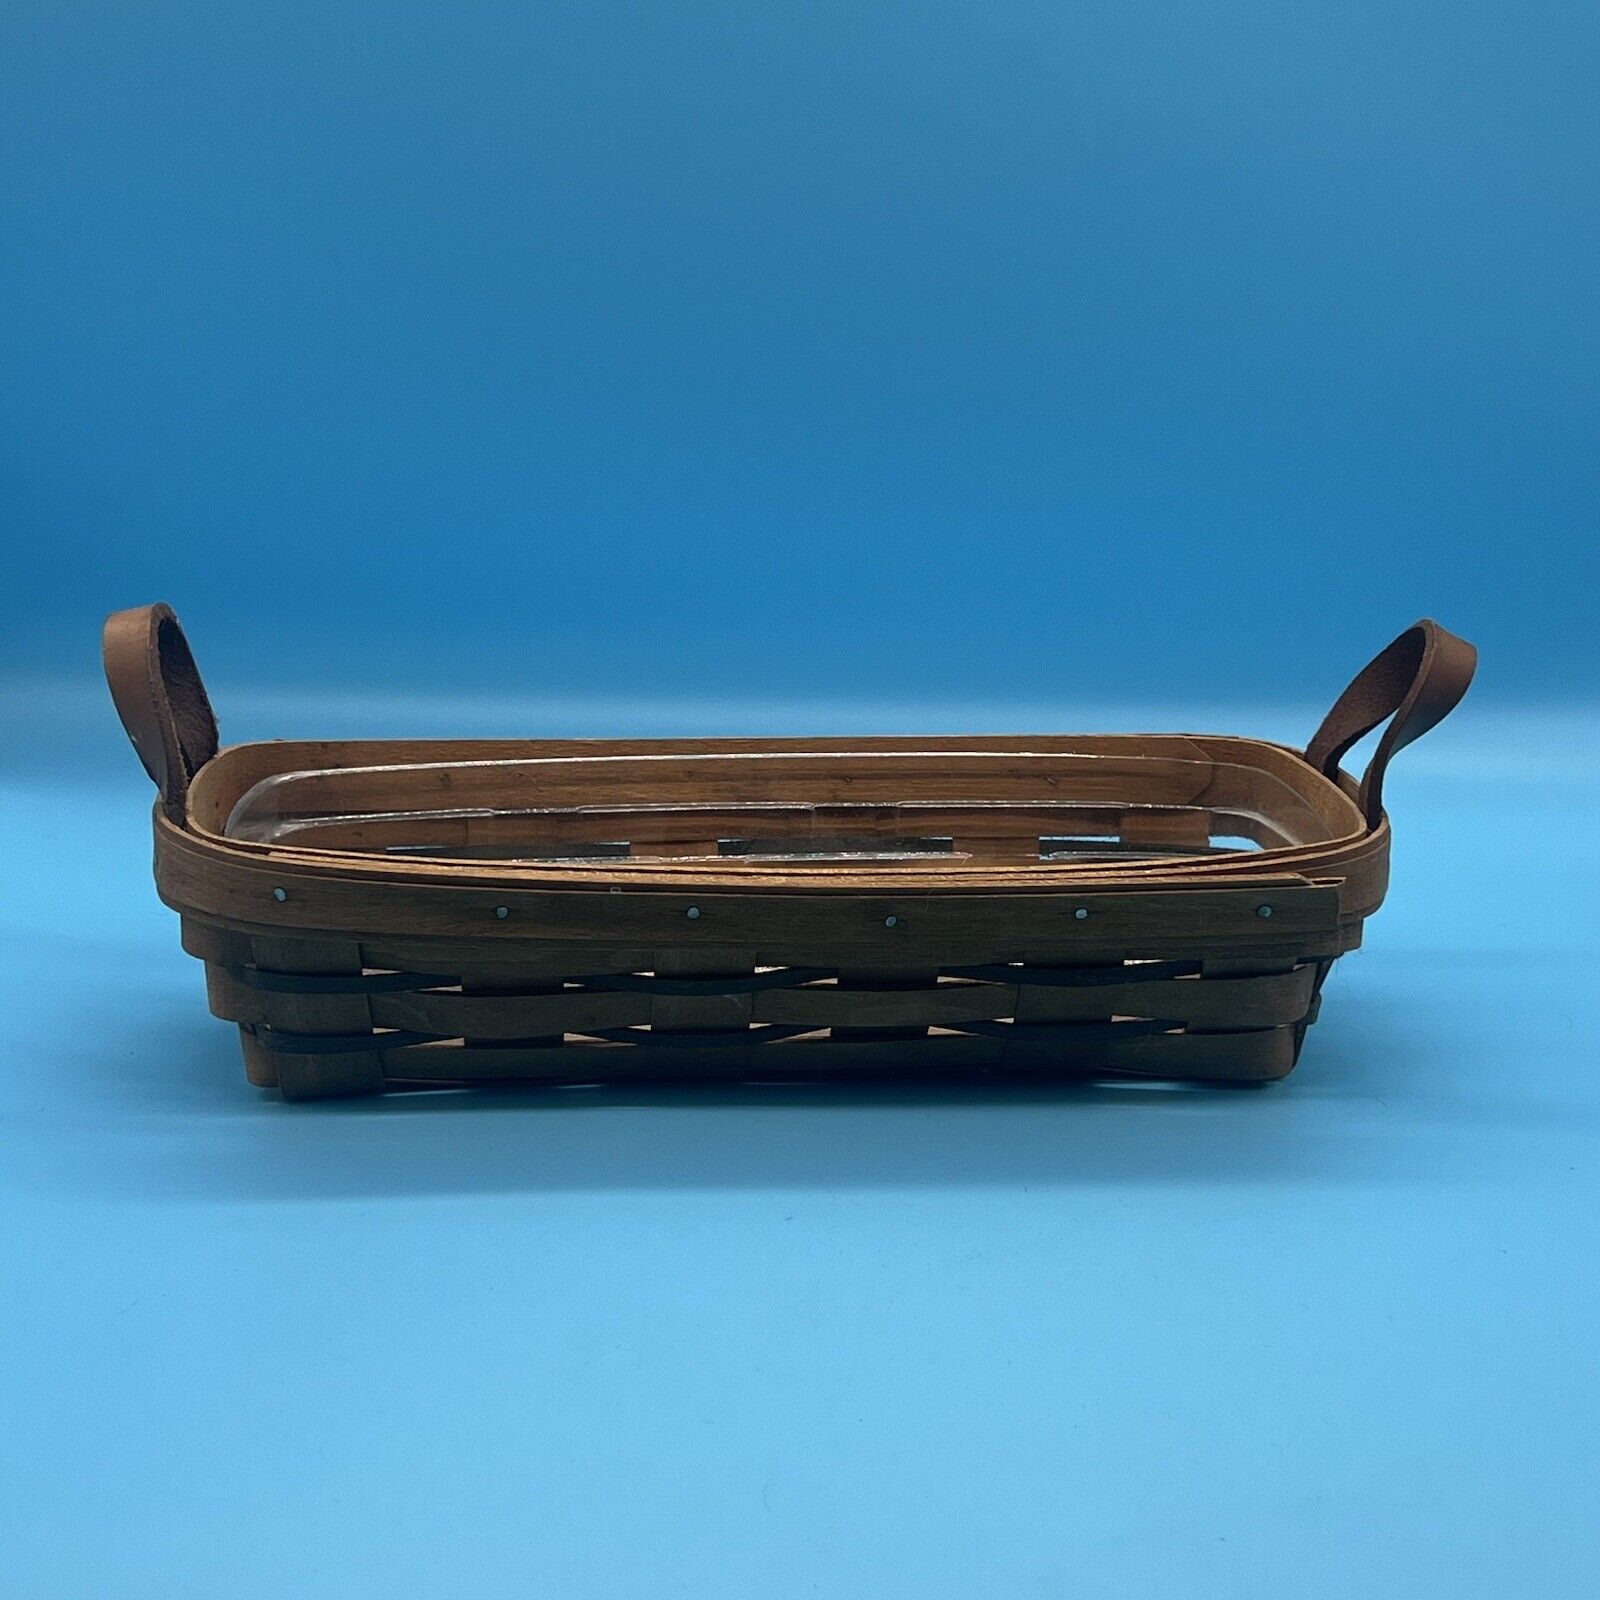 1991 LONGABERGER HEARTLAND MUFFIN / Cracker  BASKET With Leather Handle ￼